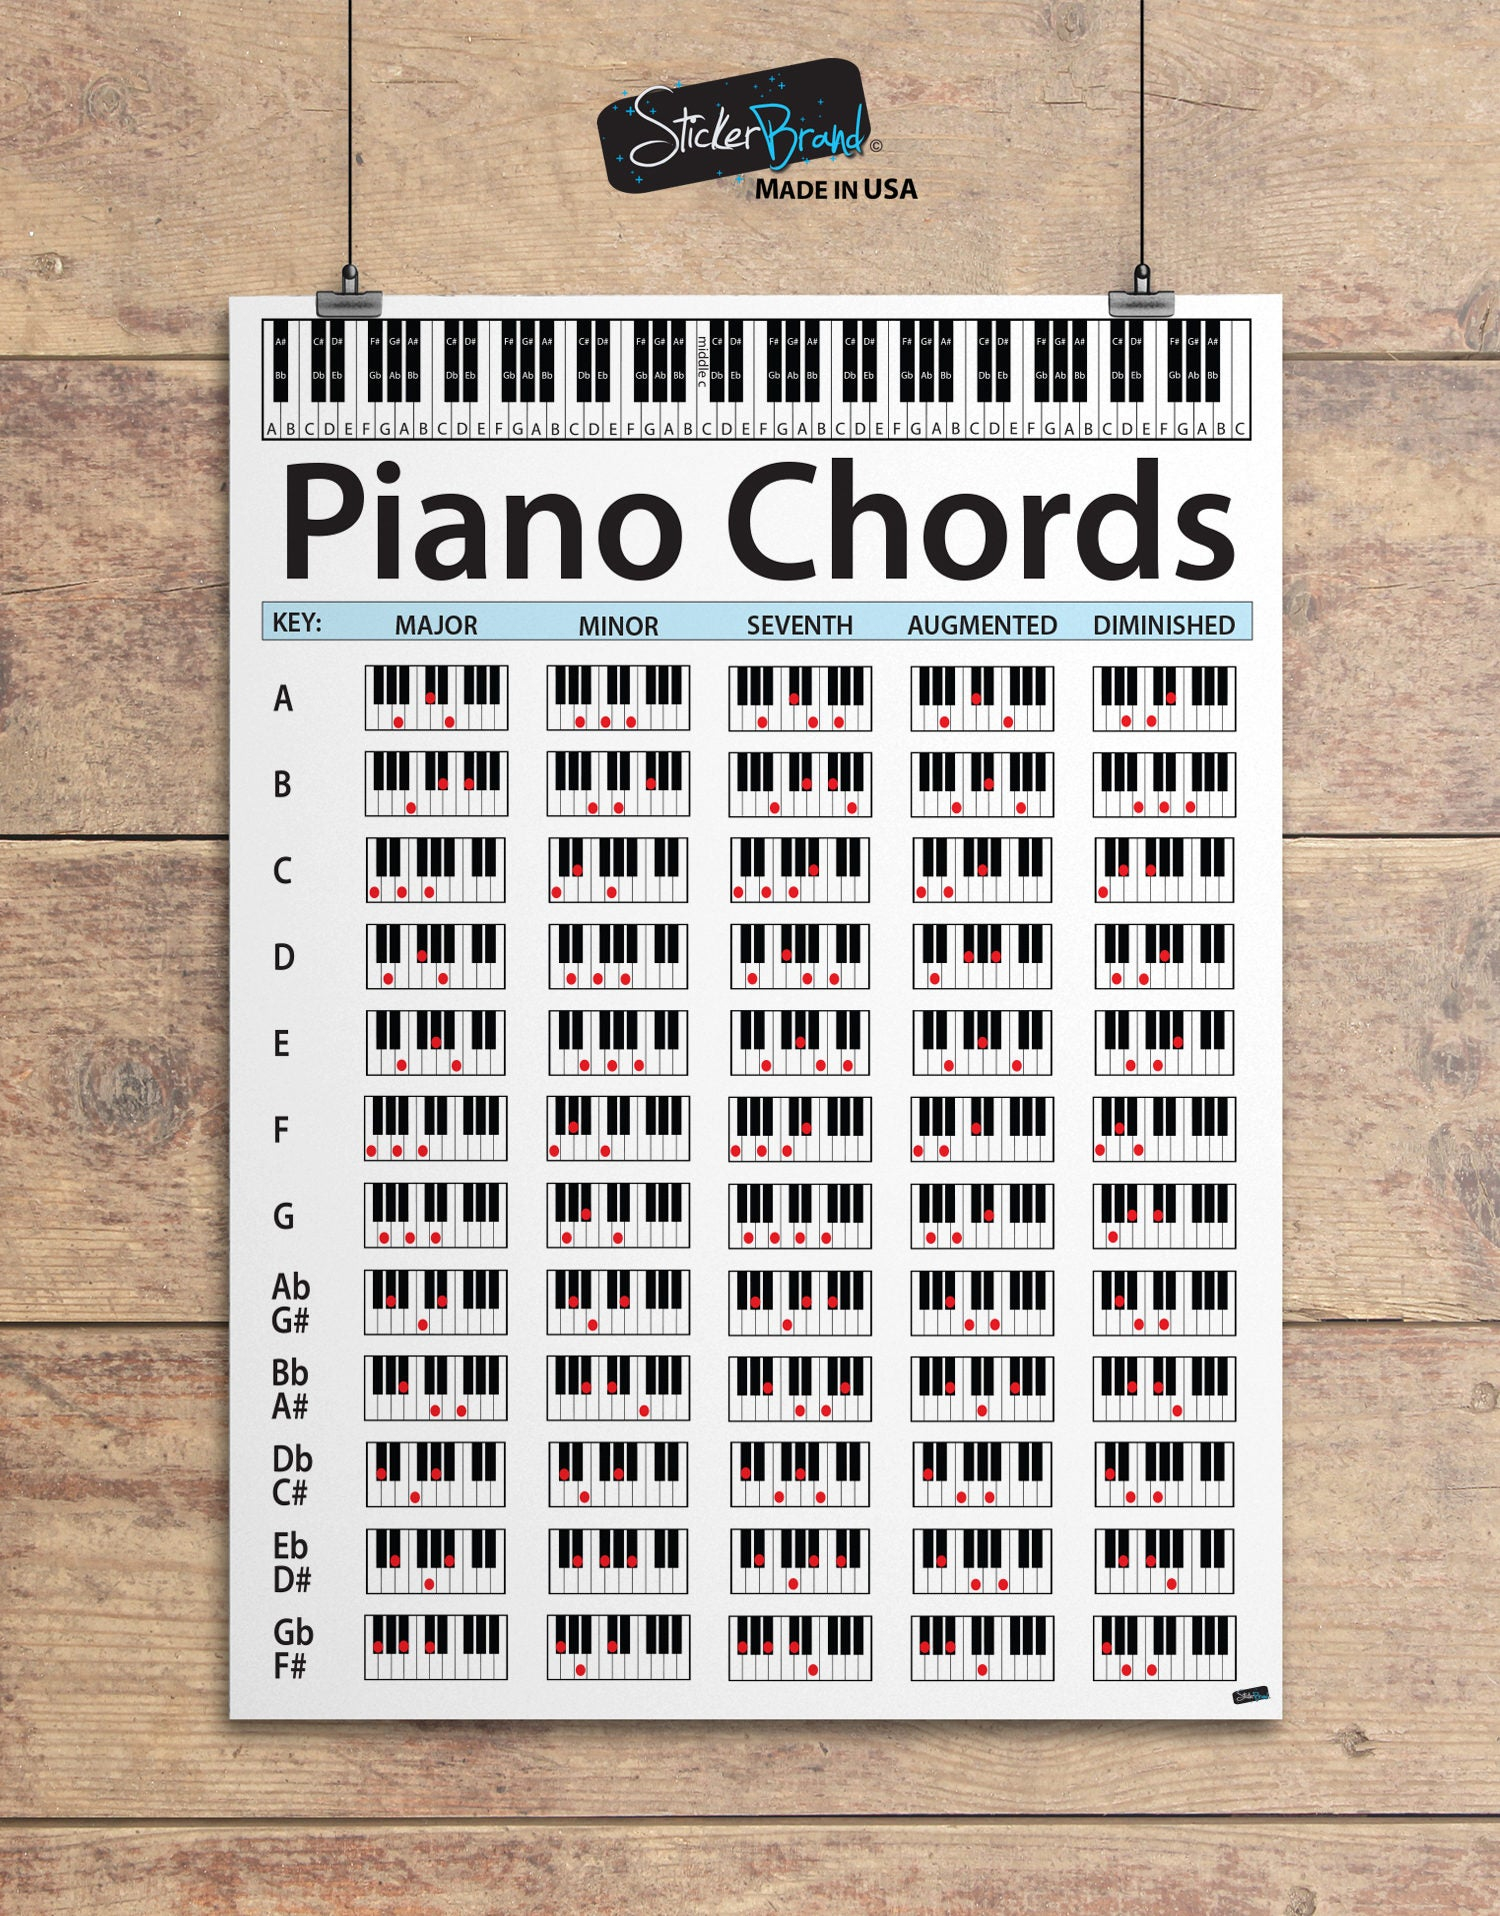 Piano Chords Chart Piano Chord Chart Poster Educational Handy Guide Chart Print For Keyboard Music Lessons P1001